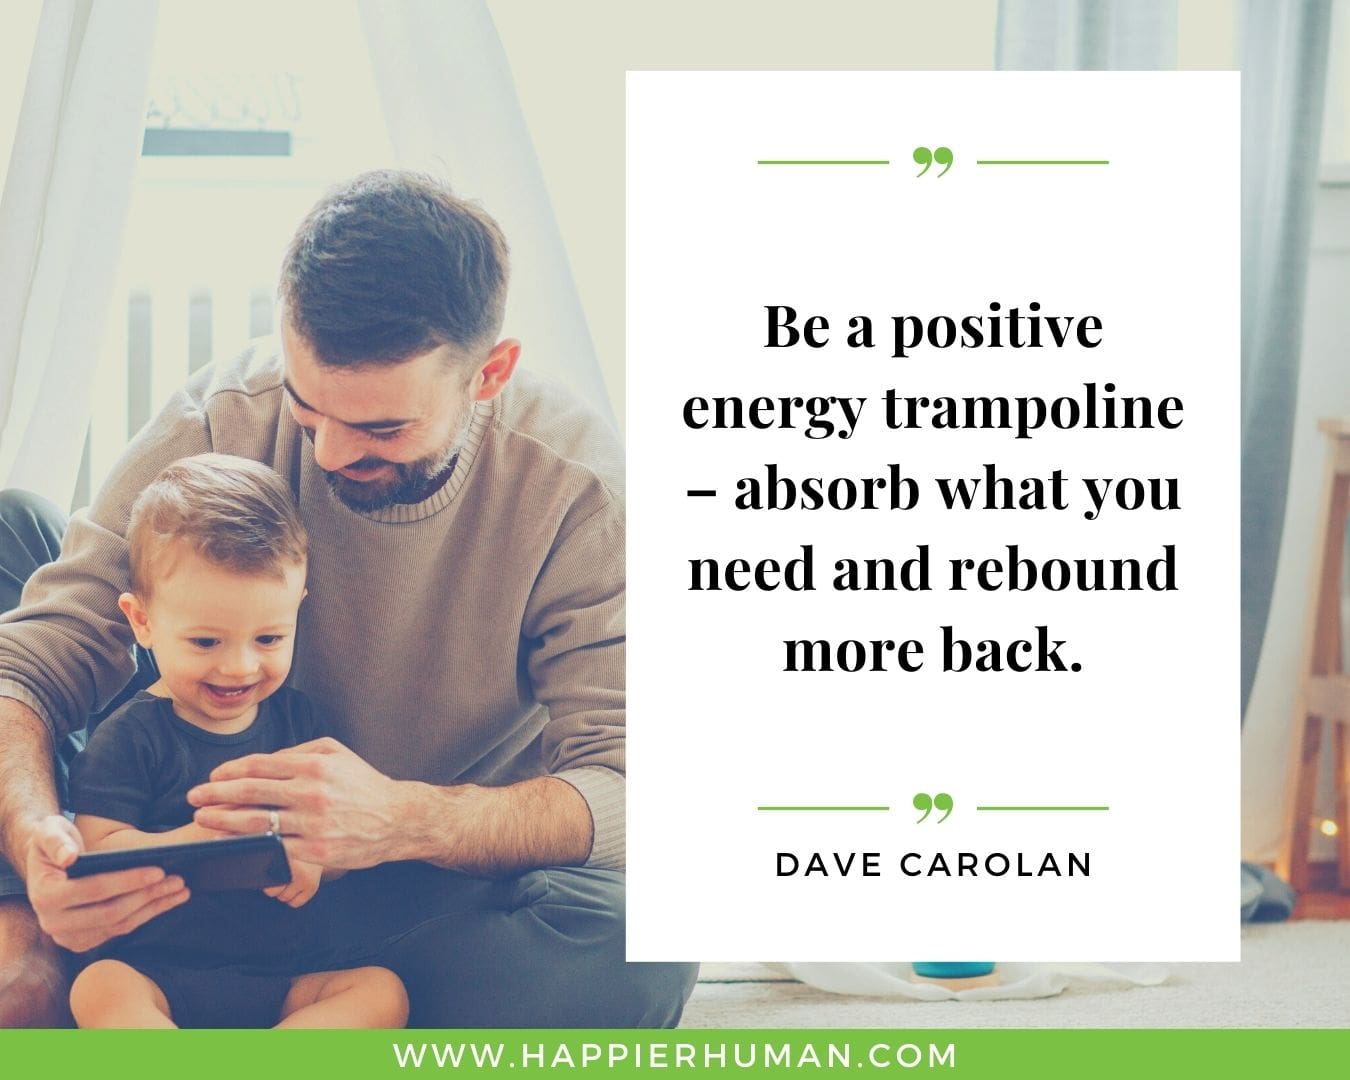 Positive Energy Quotes - “Be a positive energy trampoline - absorb what you need and rebound more back.” - Dave Carolan